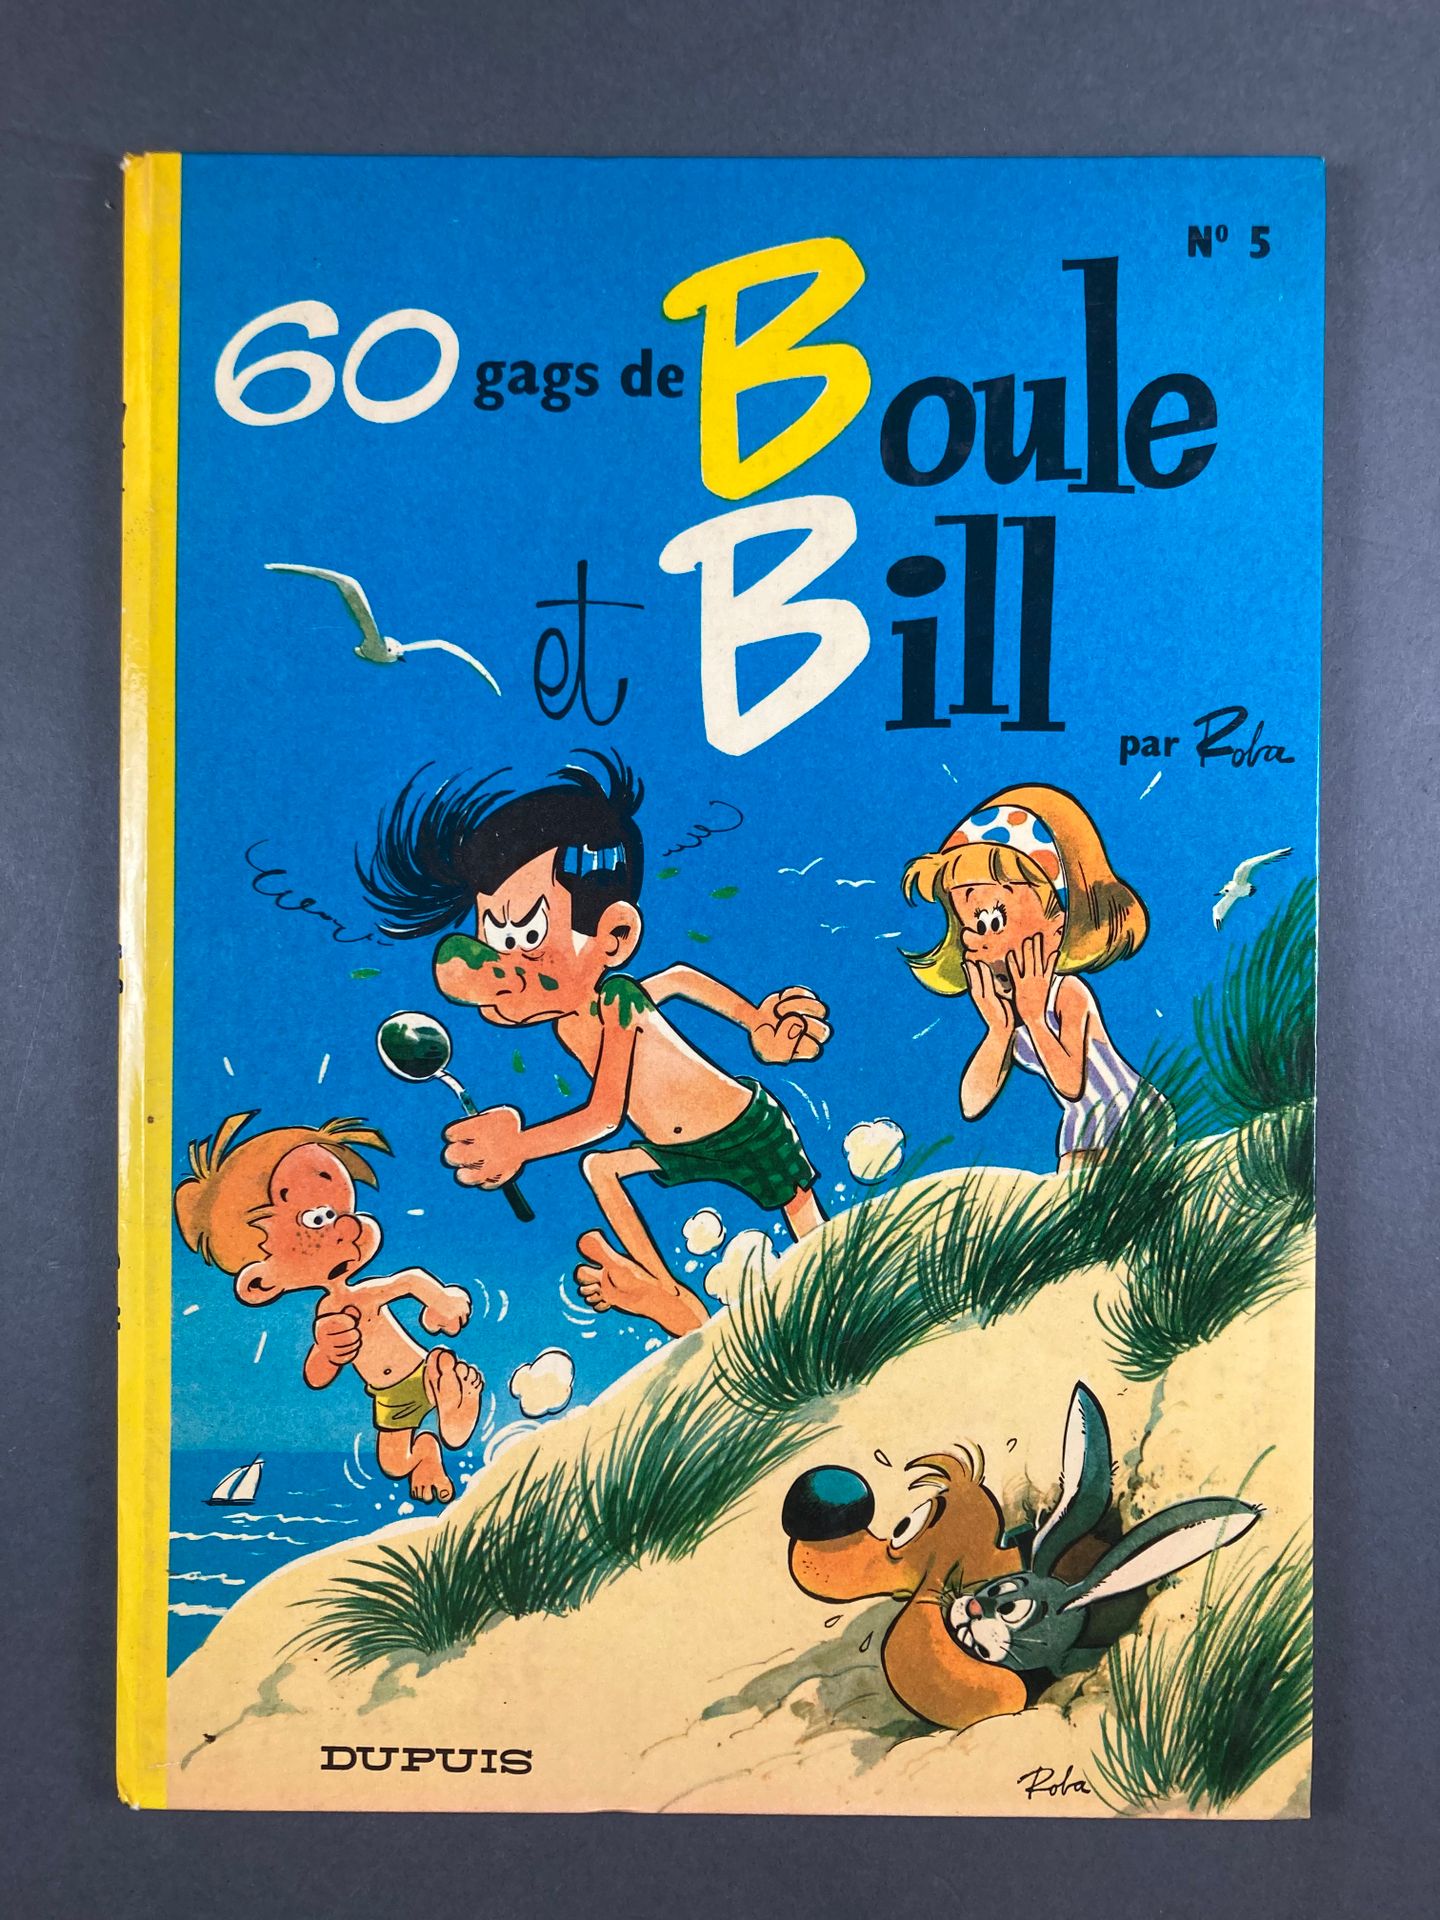 Roba - Boule et Bill 60 gags of Boule et Bill, 5, 1969, EO, by Dupuis, BE+ to TB&hellip;